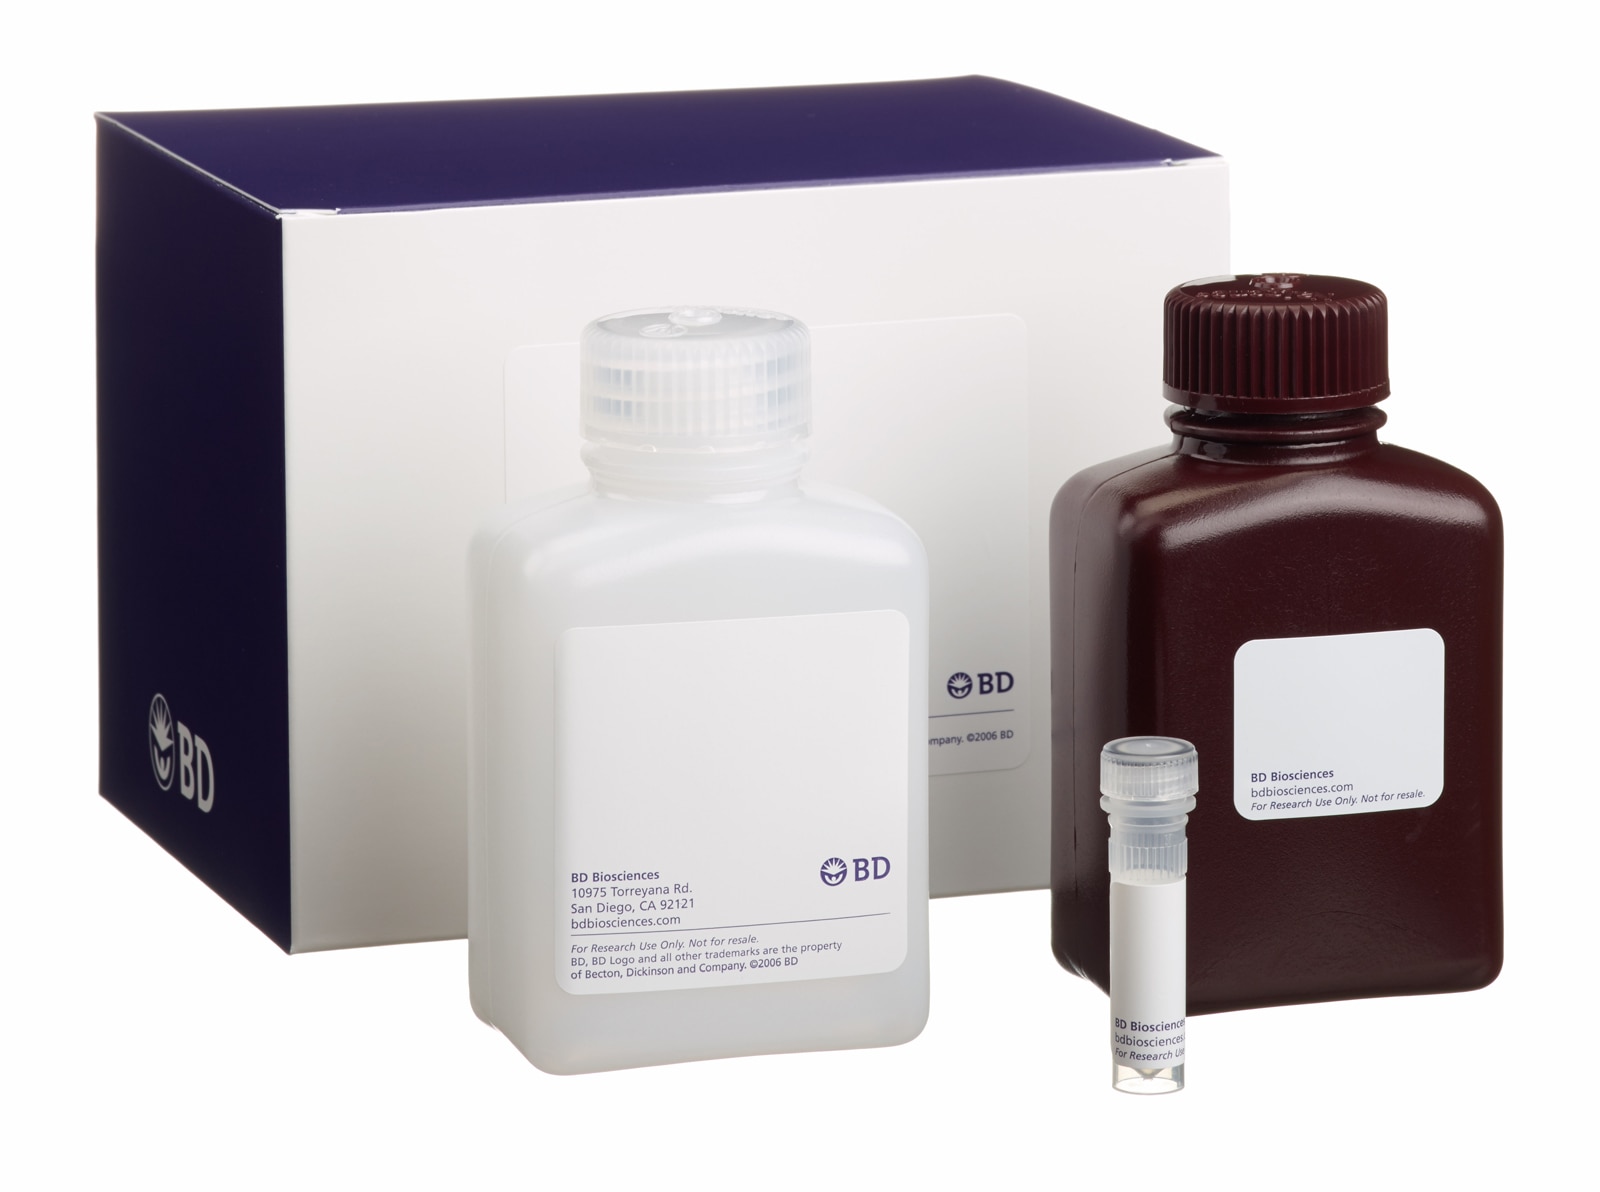 Fixation/Permeabilization Solution Kit with BD GolgiStop